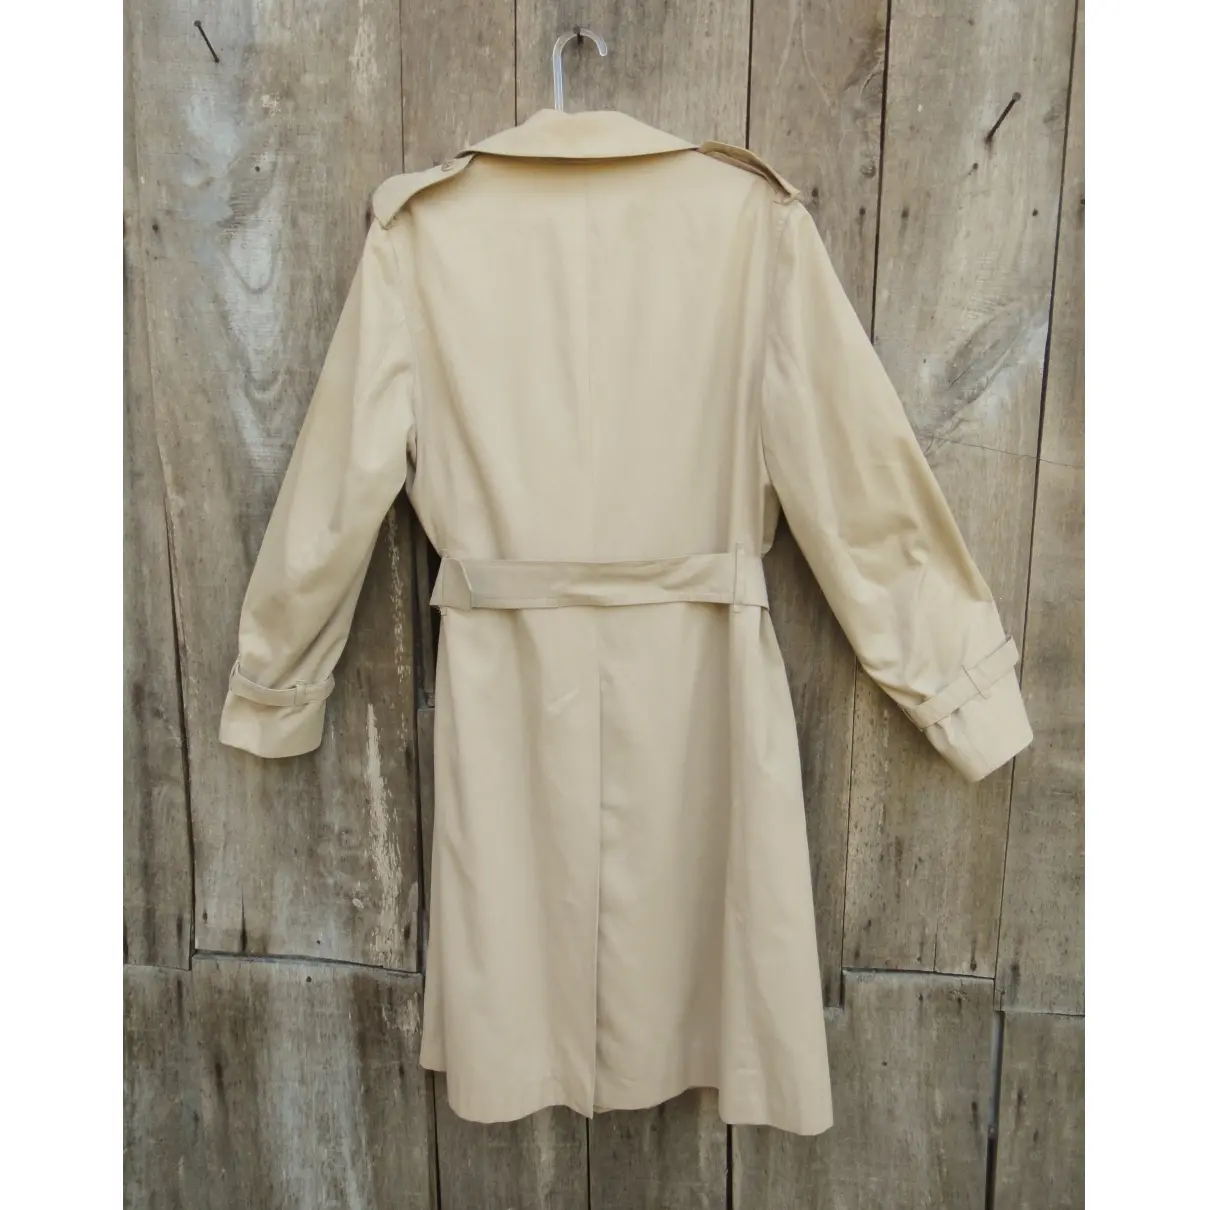 Burberry Trench for sale - Vintage